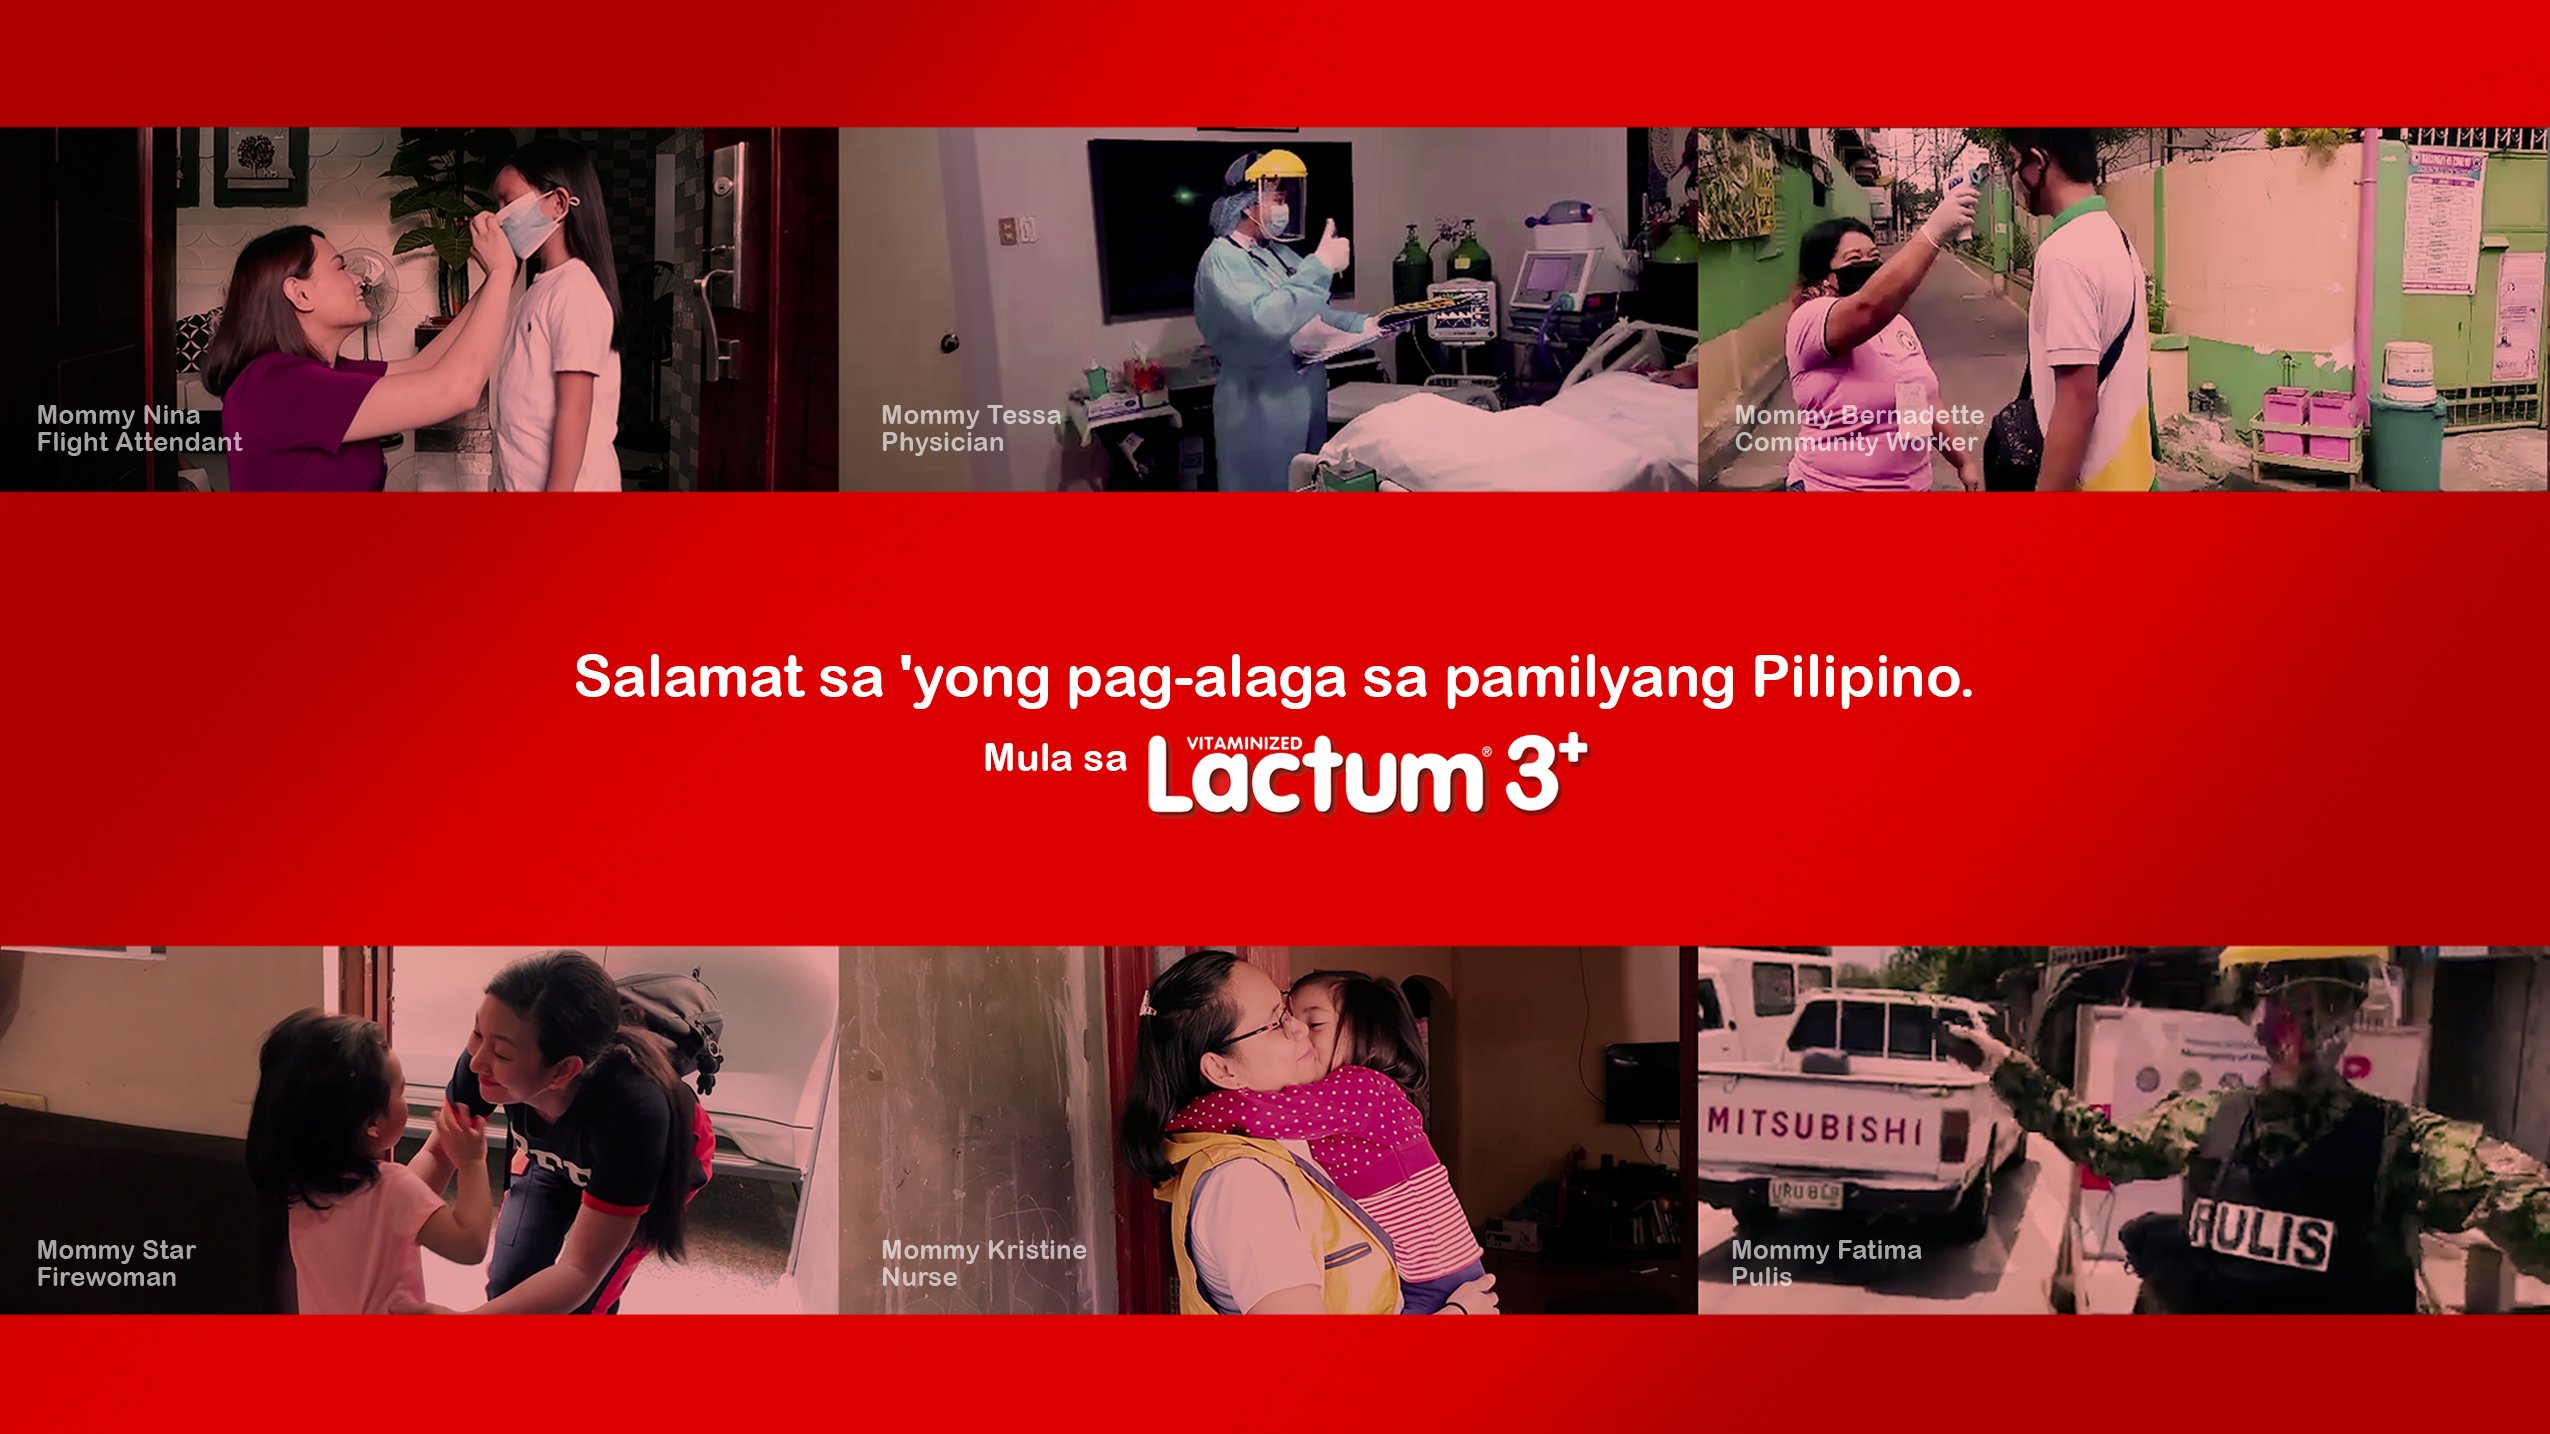 #SalamatSaAlaga: Lactum 3+ pays tribute  to a mother’s love and sacrifice during difficult times